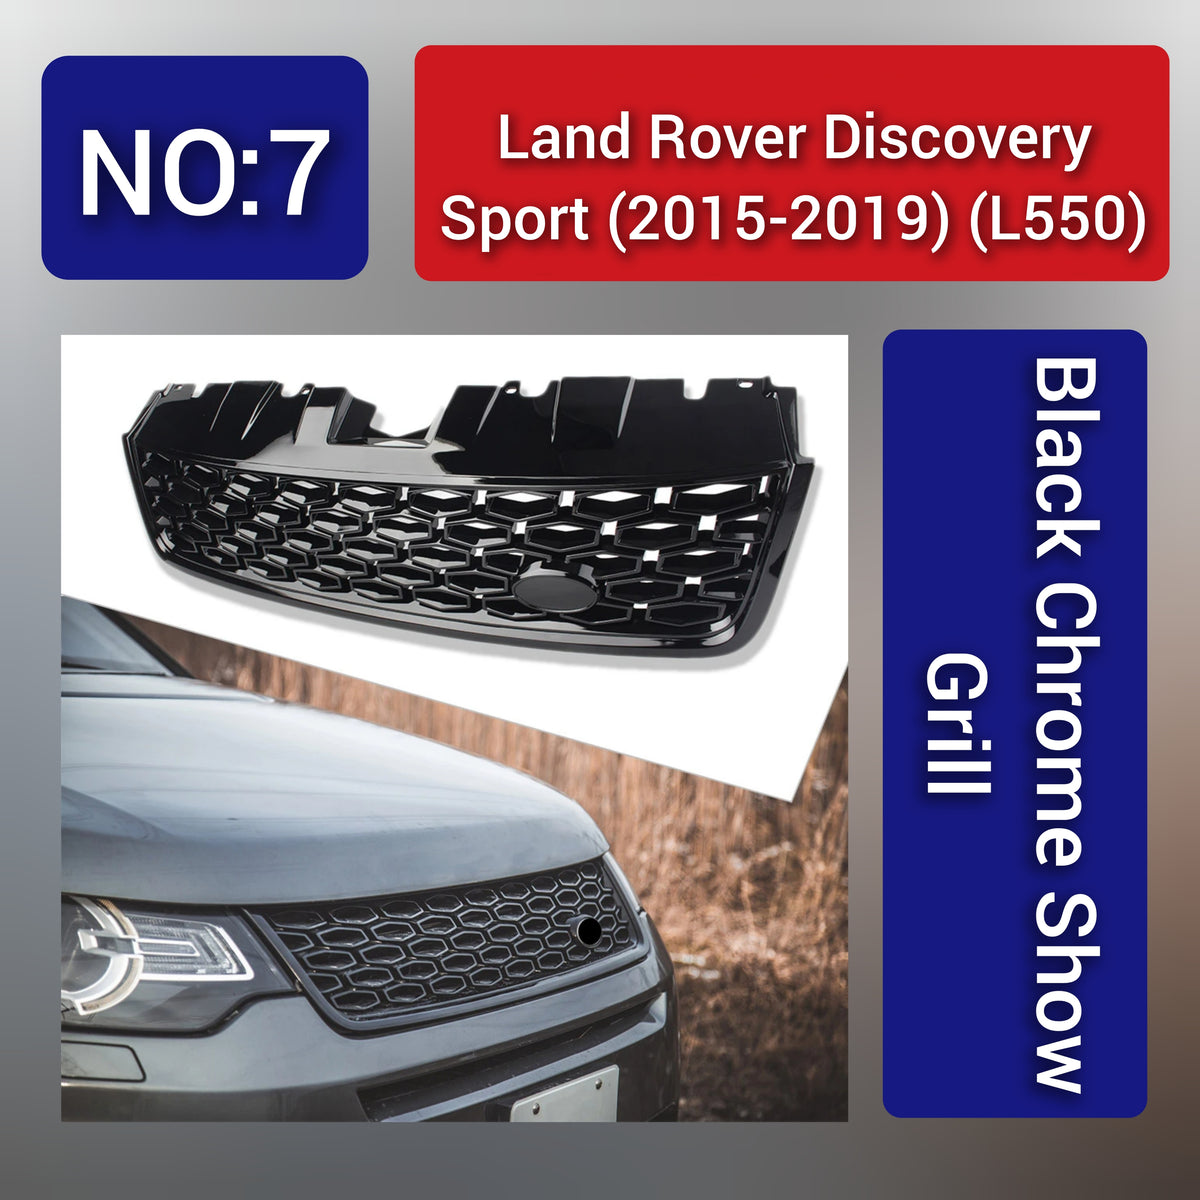 Land Rover L550 (2015-2019) Land Rover Discovery Sport Black Chrome Show Grill Tag 7